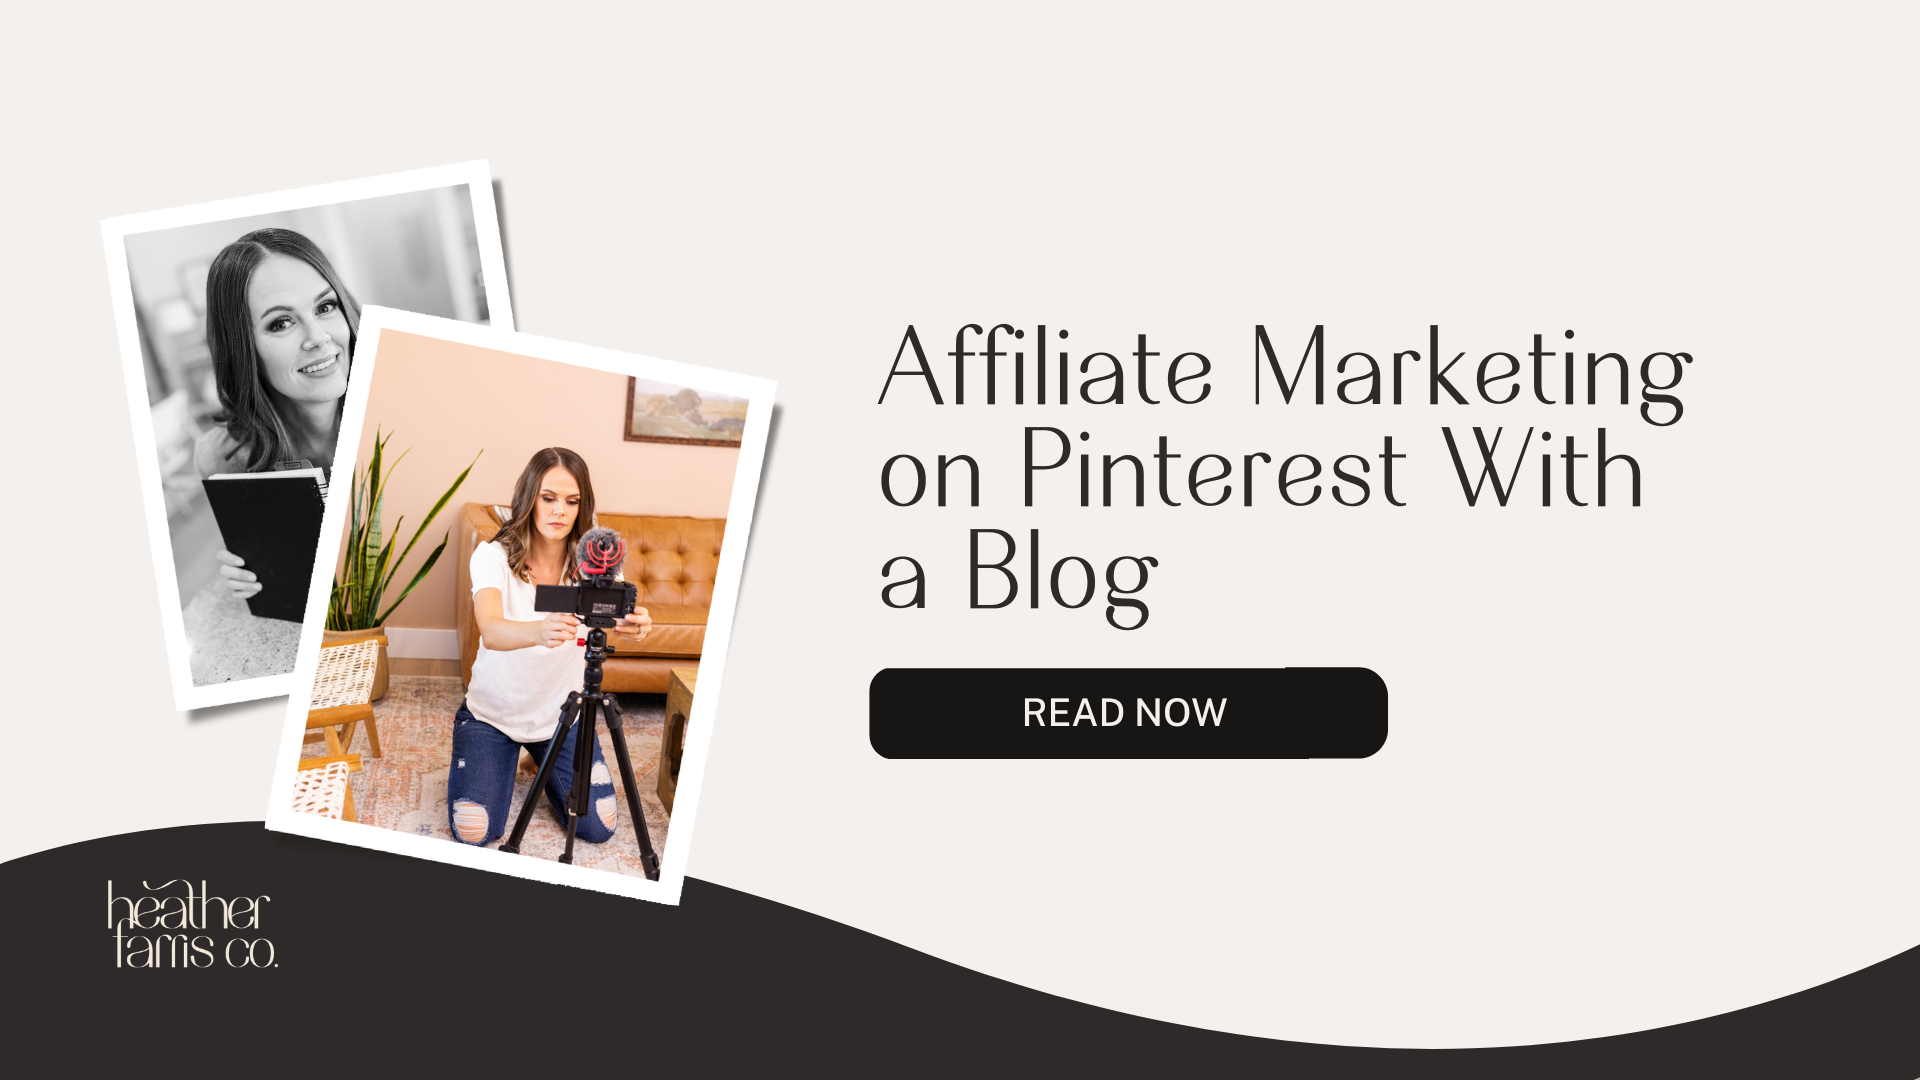 Affiliate Marketing on Pinterest With a Blog